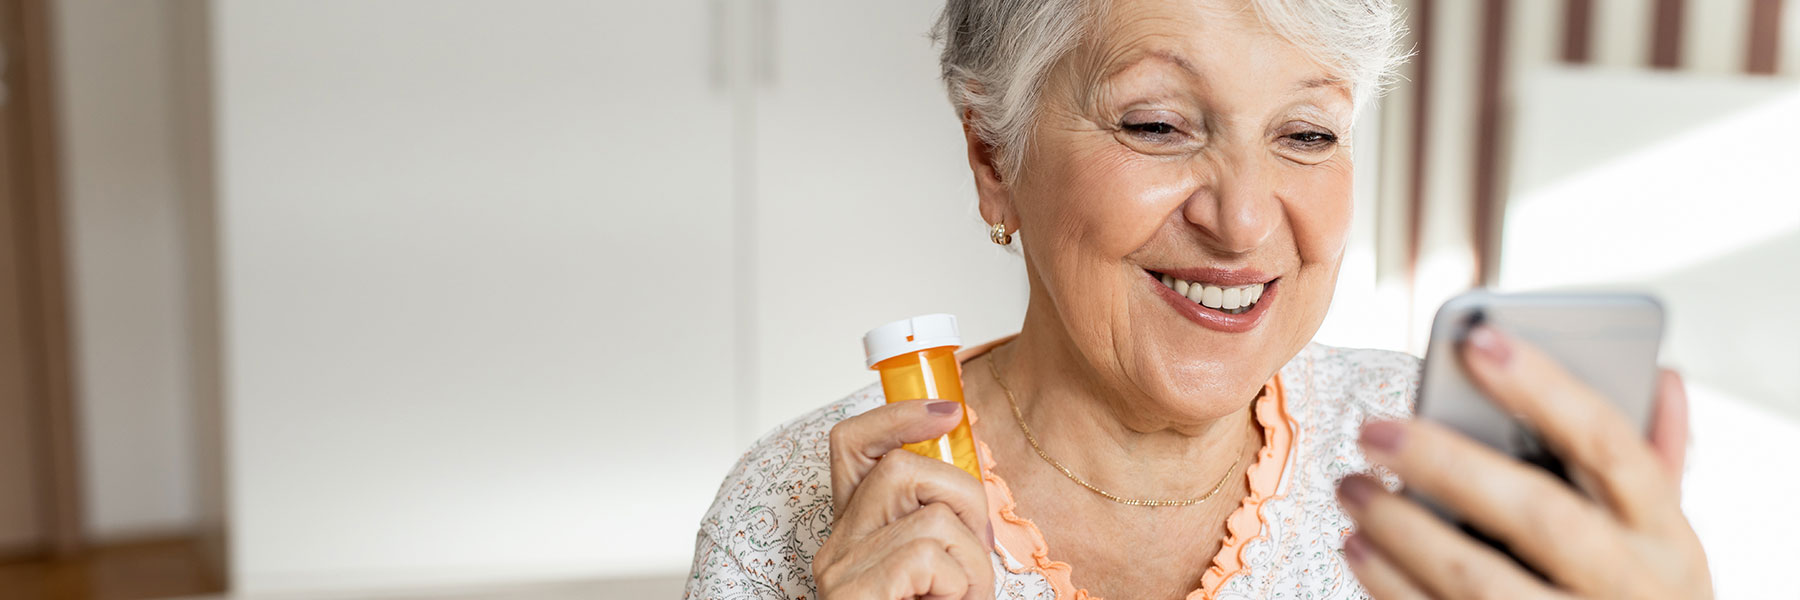 Older woman holding medication while using a phone app